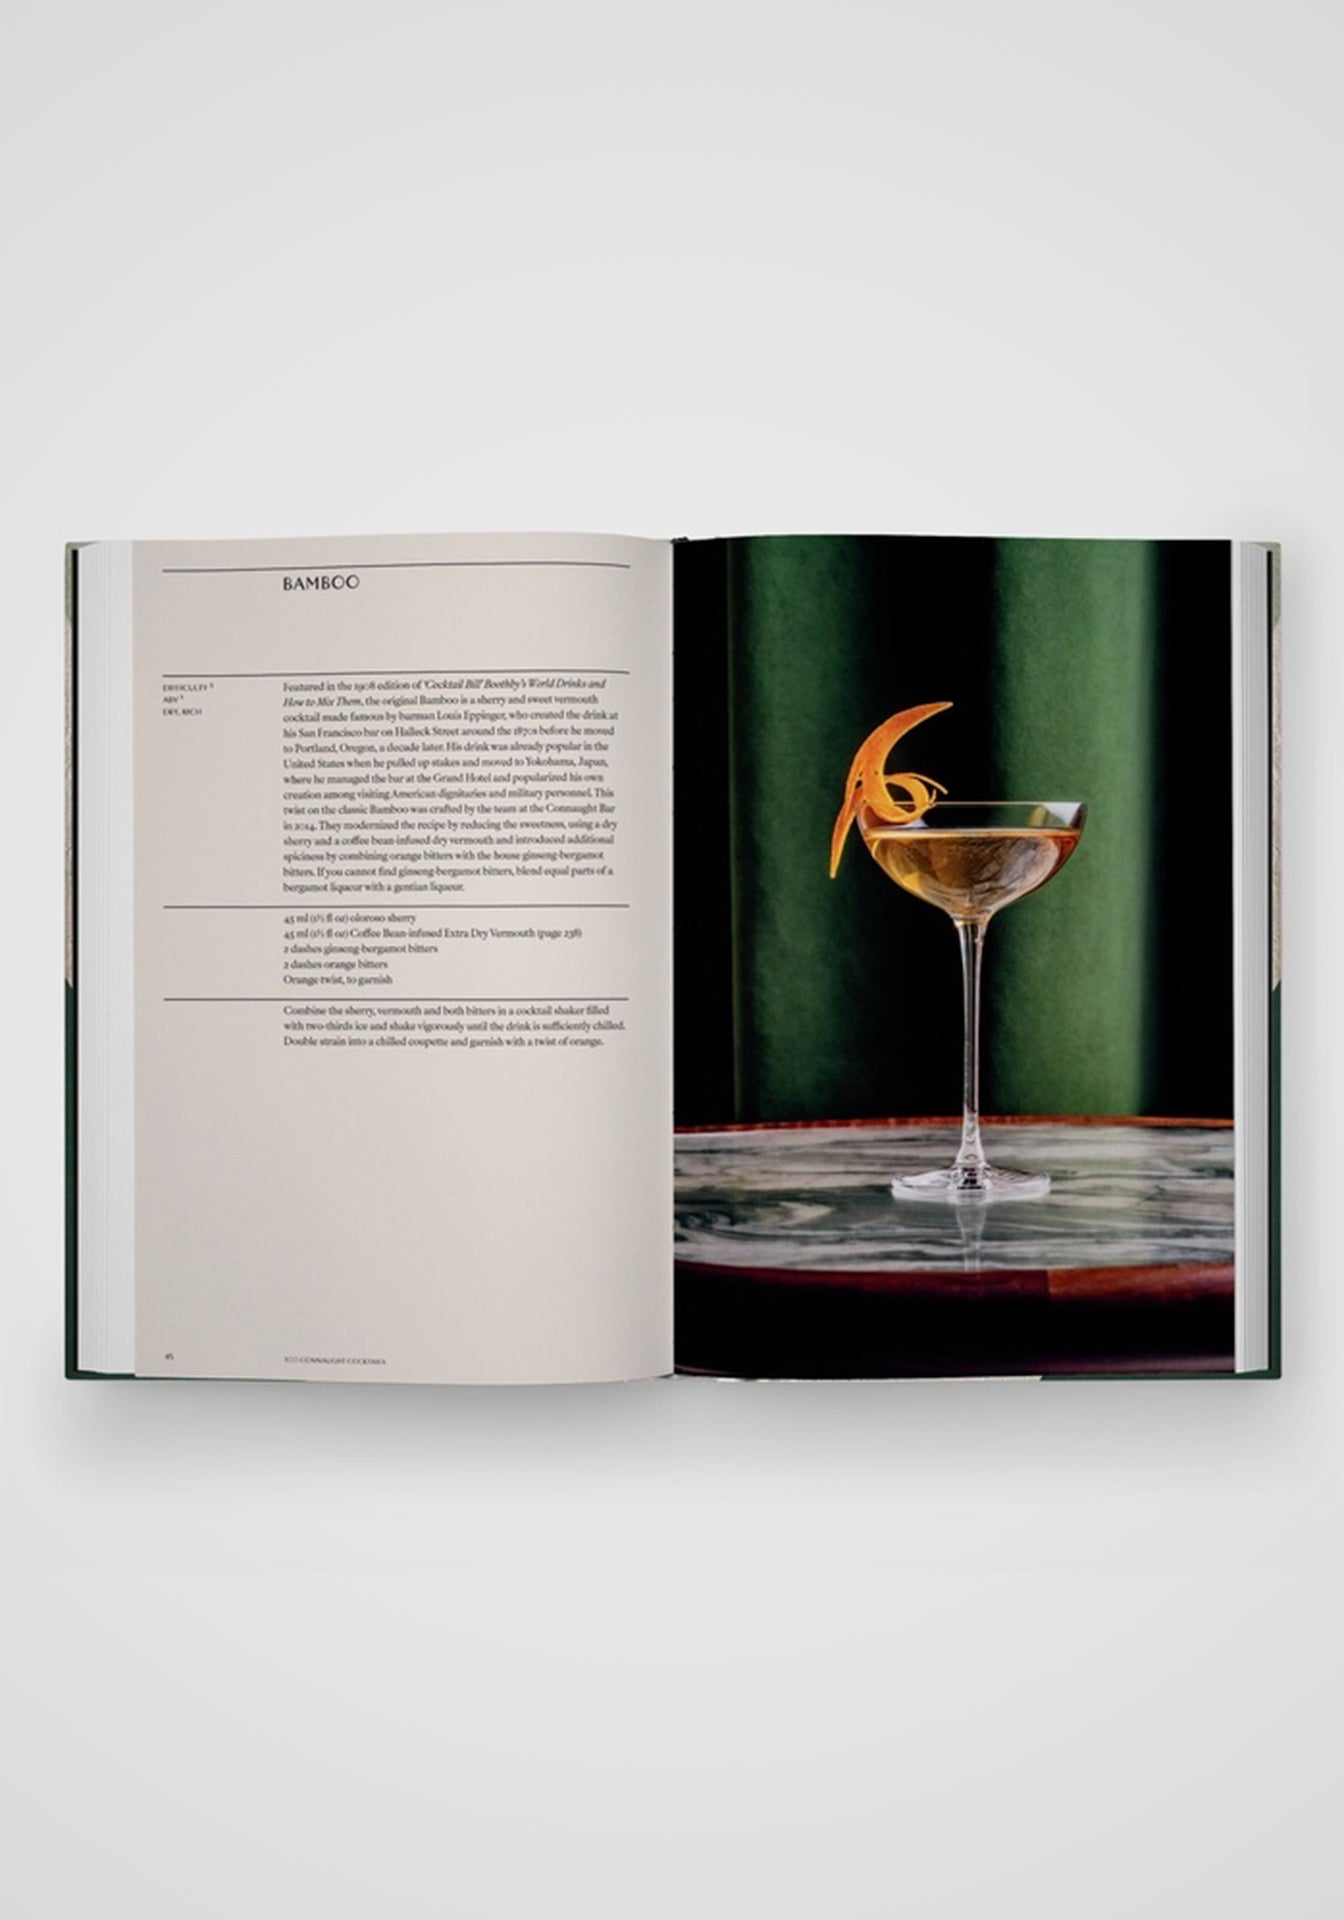 The Connaught Bar: Recipes and Iconic Creations